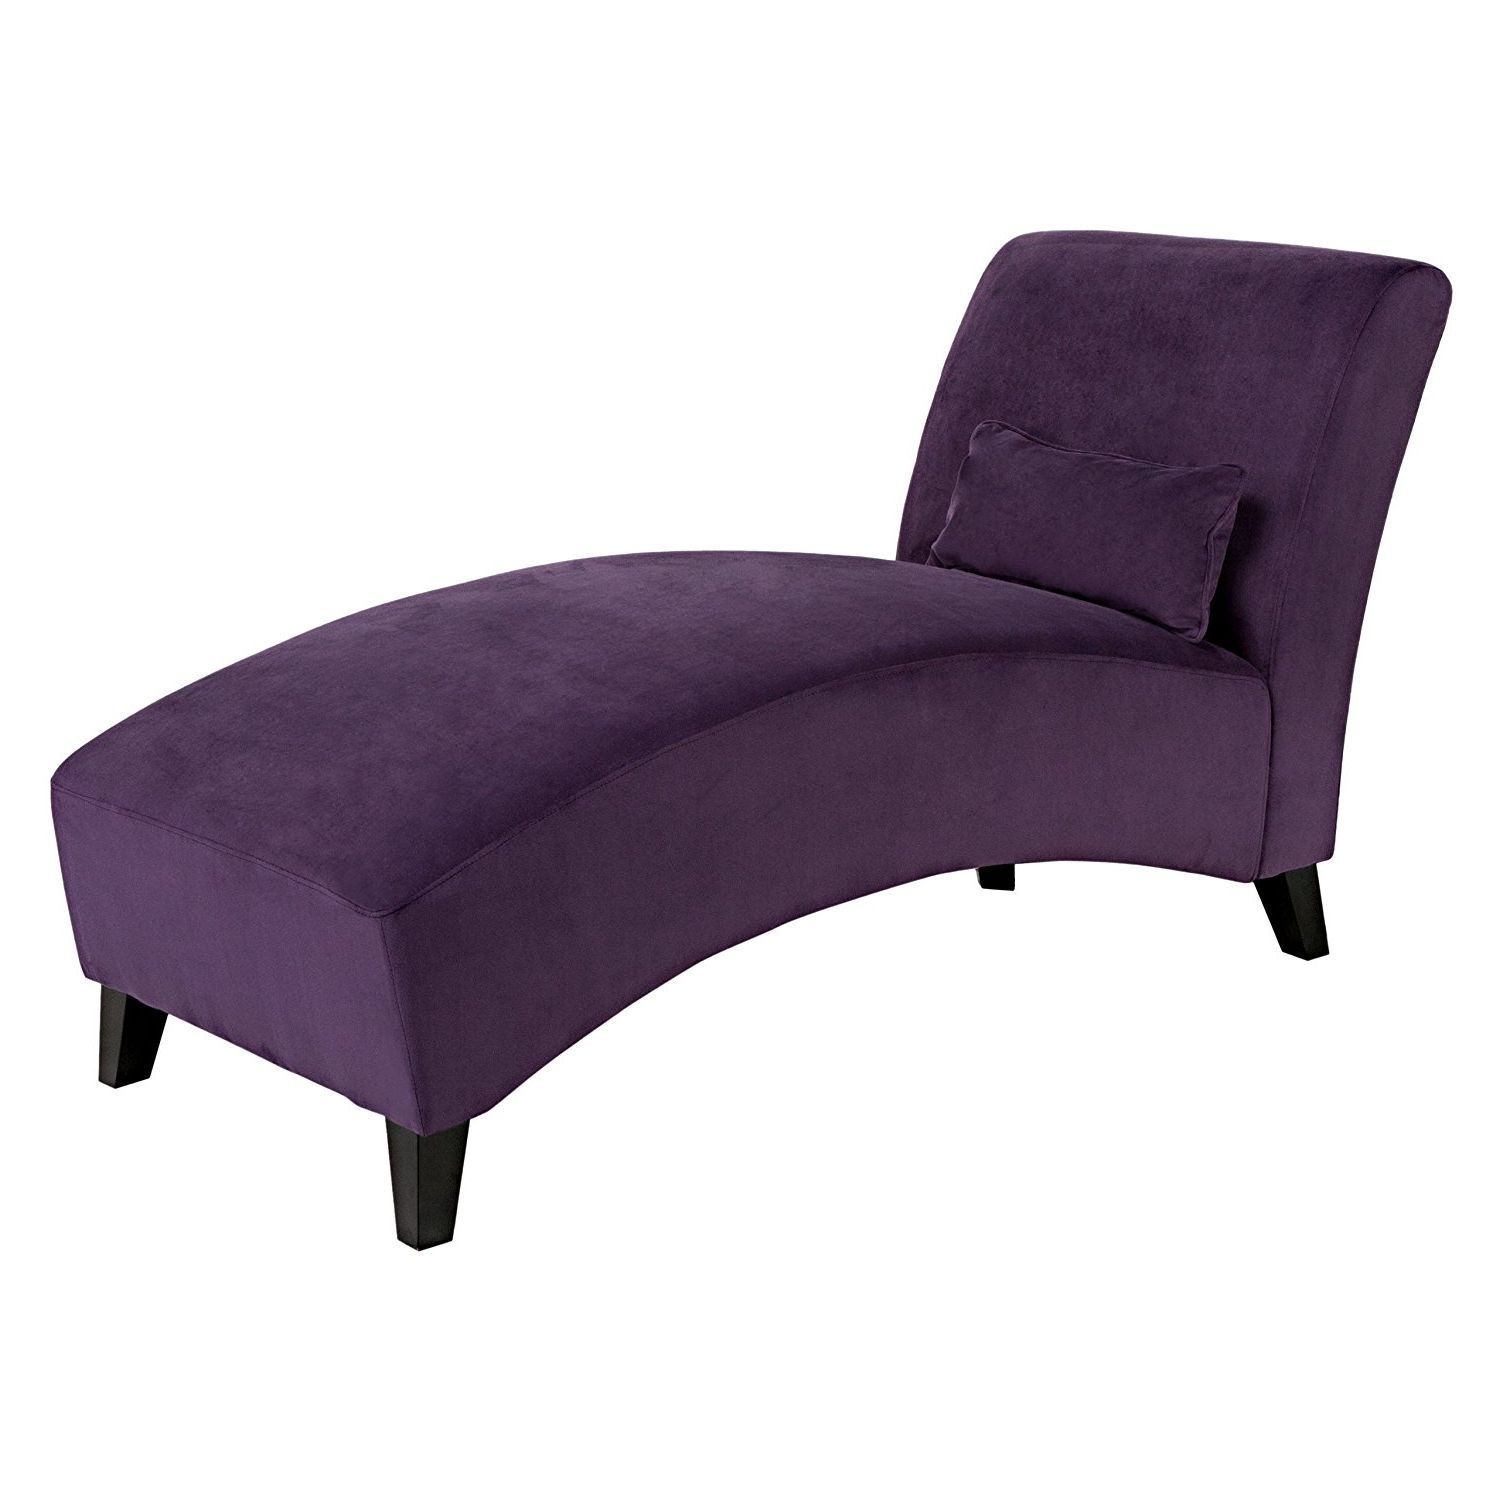 Trendy Amazon: Handy Living Chaise Lounge Chair, Purple: Kitchen & Dining Pertaining To Velvet Chaise Lounges (Photo 12 of 15)